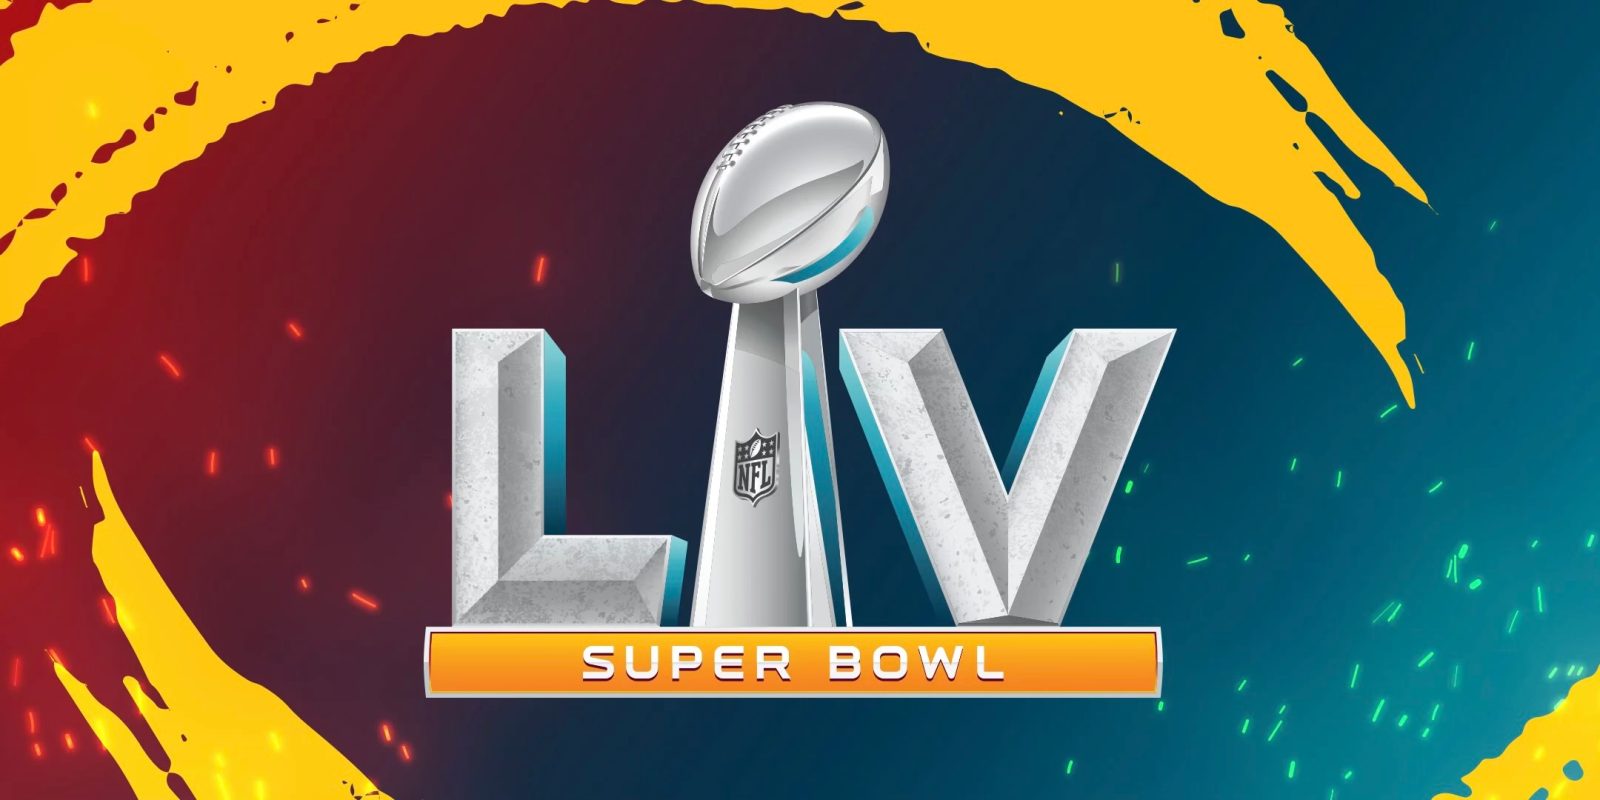 How to watch Super Bowl LV free on web, iPhone, Apple TV, more